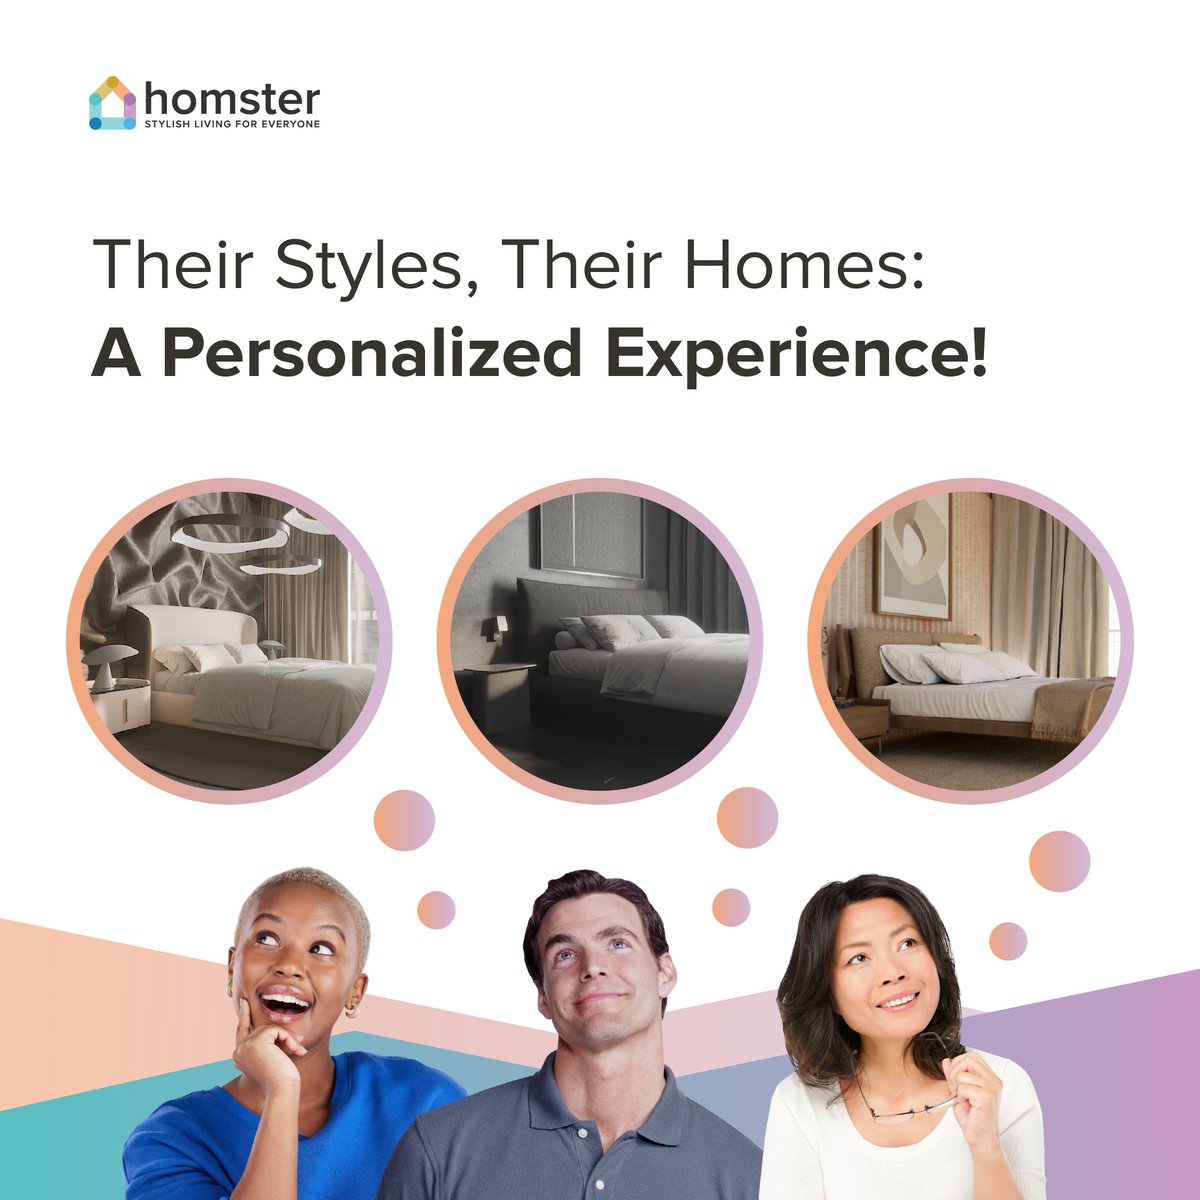 Their styles, their homes: a personalized experience!

Let homebuyers instantly flip through multiple interior styles with one click.

#Homster #PropertySales #RealEstateTech #InteriorDesignTools